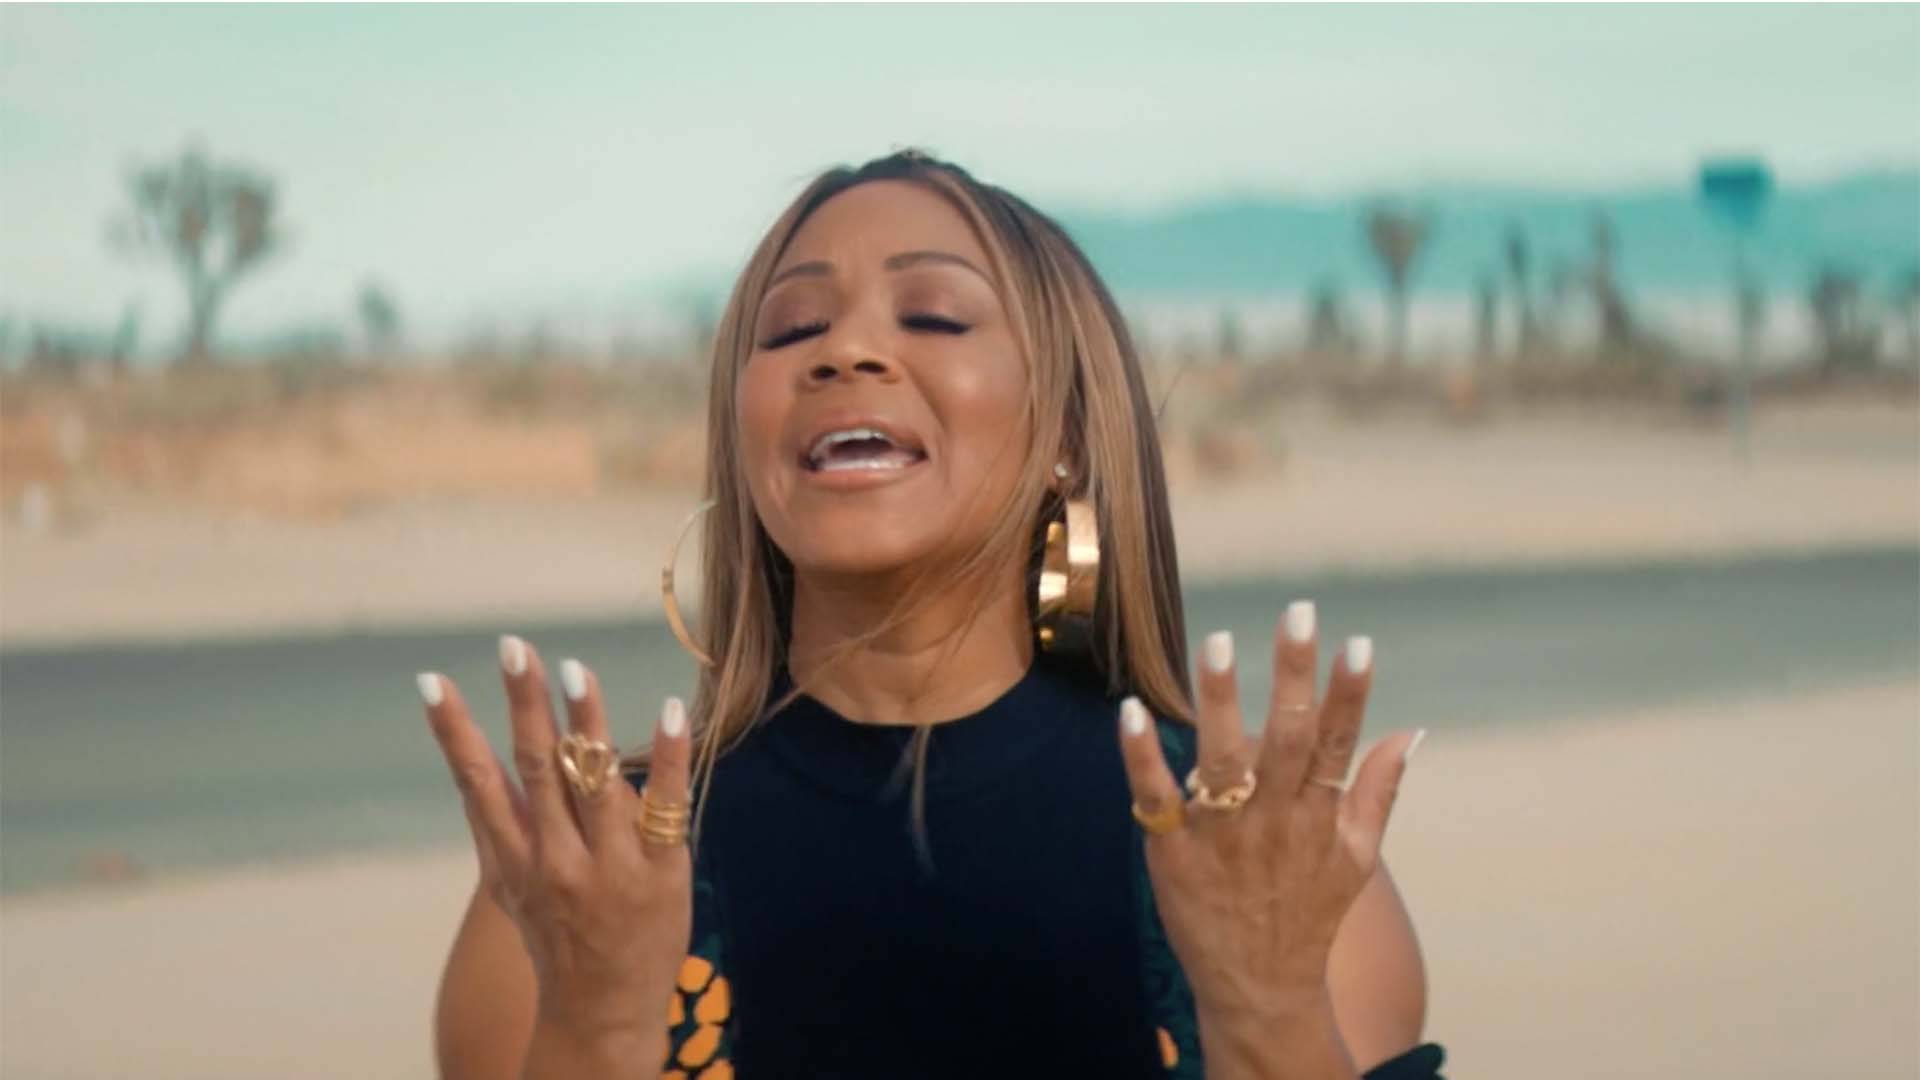 Erica Campbell - "Positive"